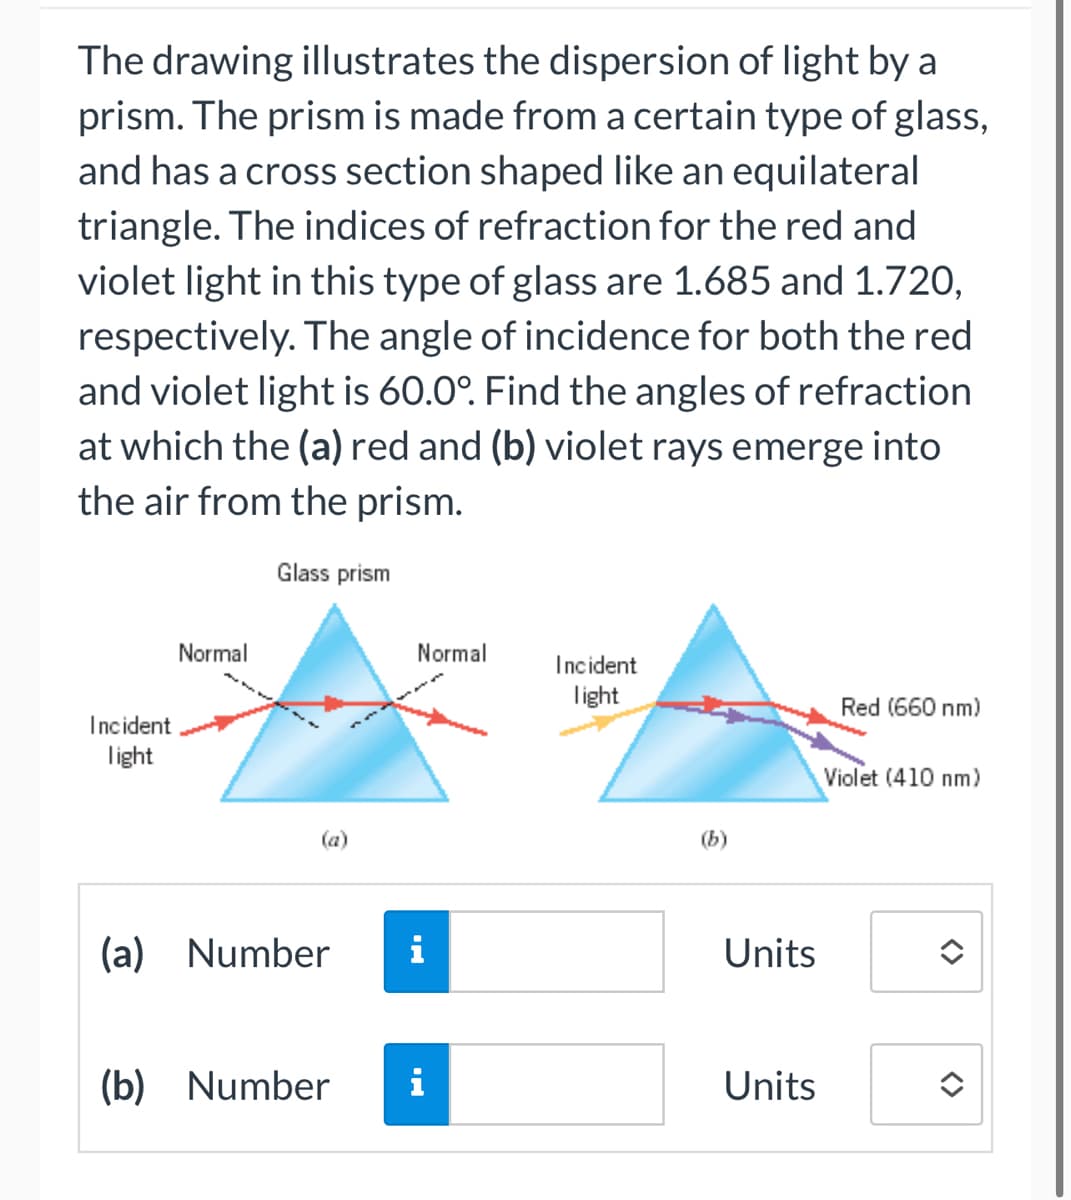 The drawing illustrates the dispersion of light by a
prism. The prism is made from a certain type of glass,
and has a cross section shaped like an equilateral
triangle. The indices of refraction for the red and
violet light in this type of glass are 1.685 and 1.720,
respectively. The angle of incidence for both the red
and violet light is 60.0°. Find the angles of refraction
at which the (a) red and (b) violet rays emerge into
the air from the prism.
Incident
light
Normal
Glass prism
Normal
(a) Number i
(b) Number i
Incident
light
(b)
Units
Units
Red (660 nm)
Violet (410 nm)